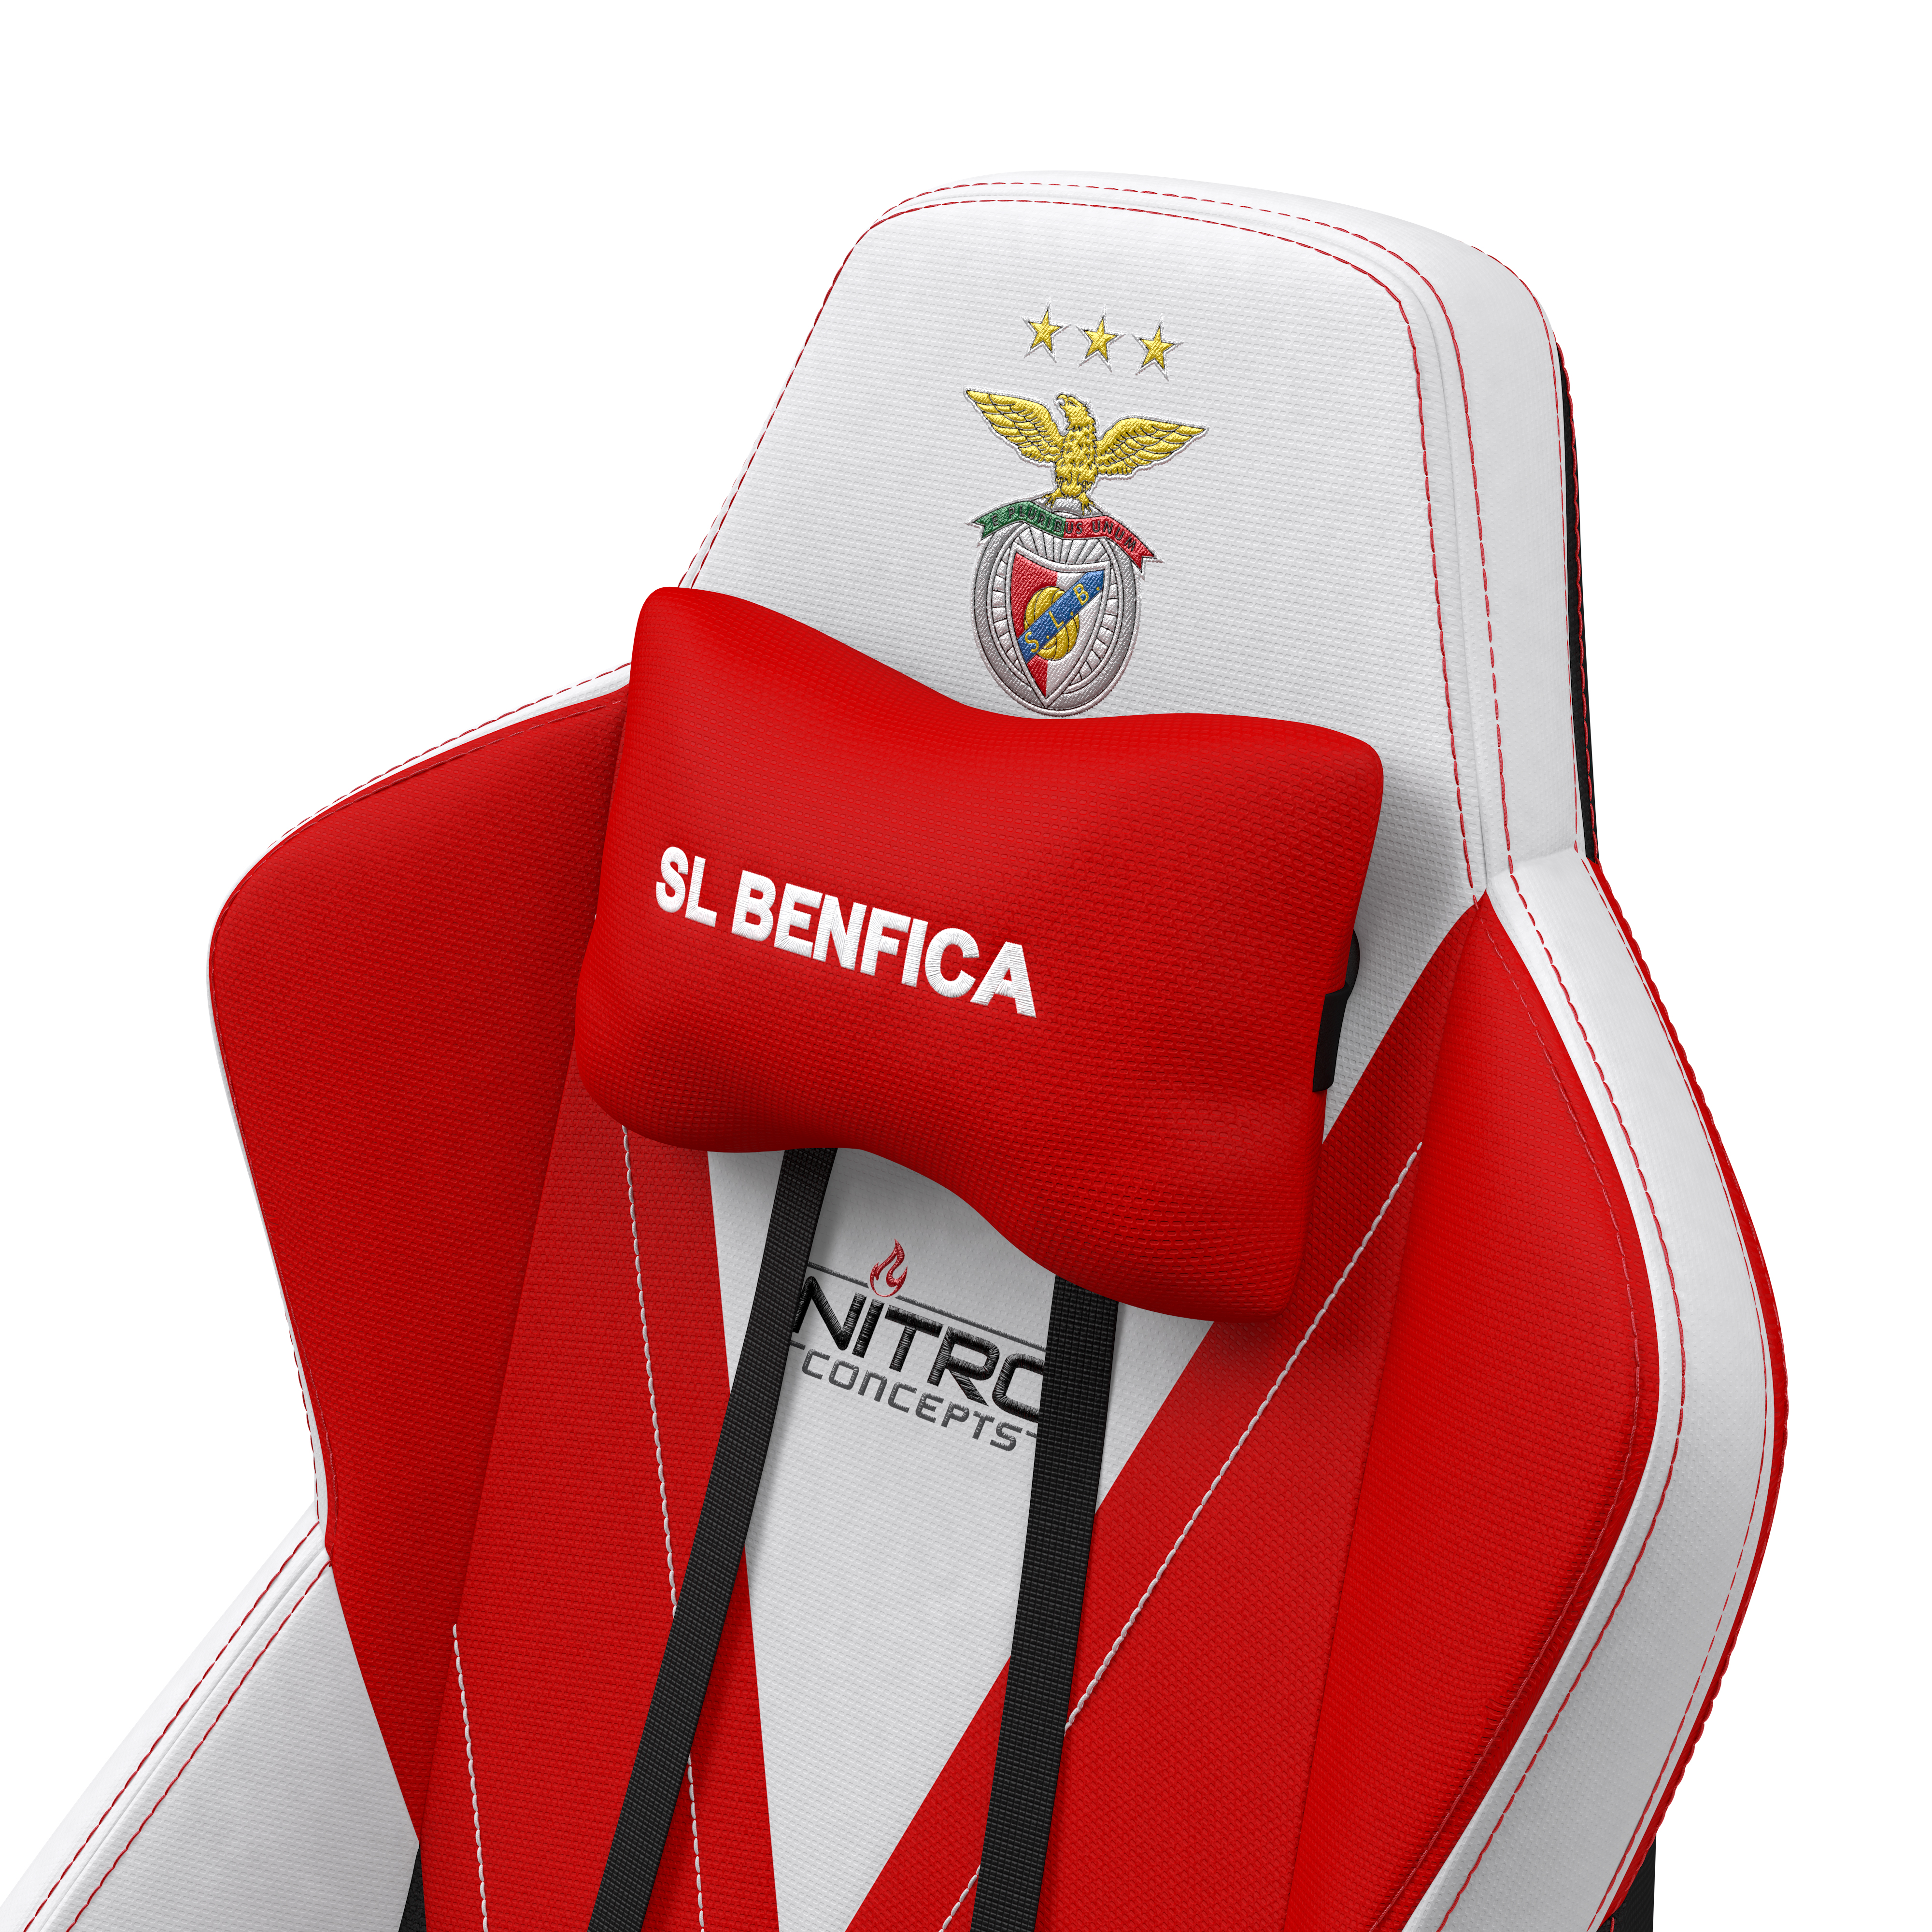 Nitro Concepts Partners With Football Team Sl Benfica For Special Edition S300 Gaming Chair Kitguru